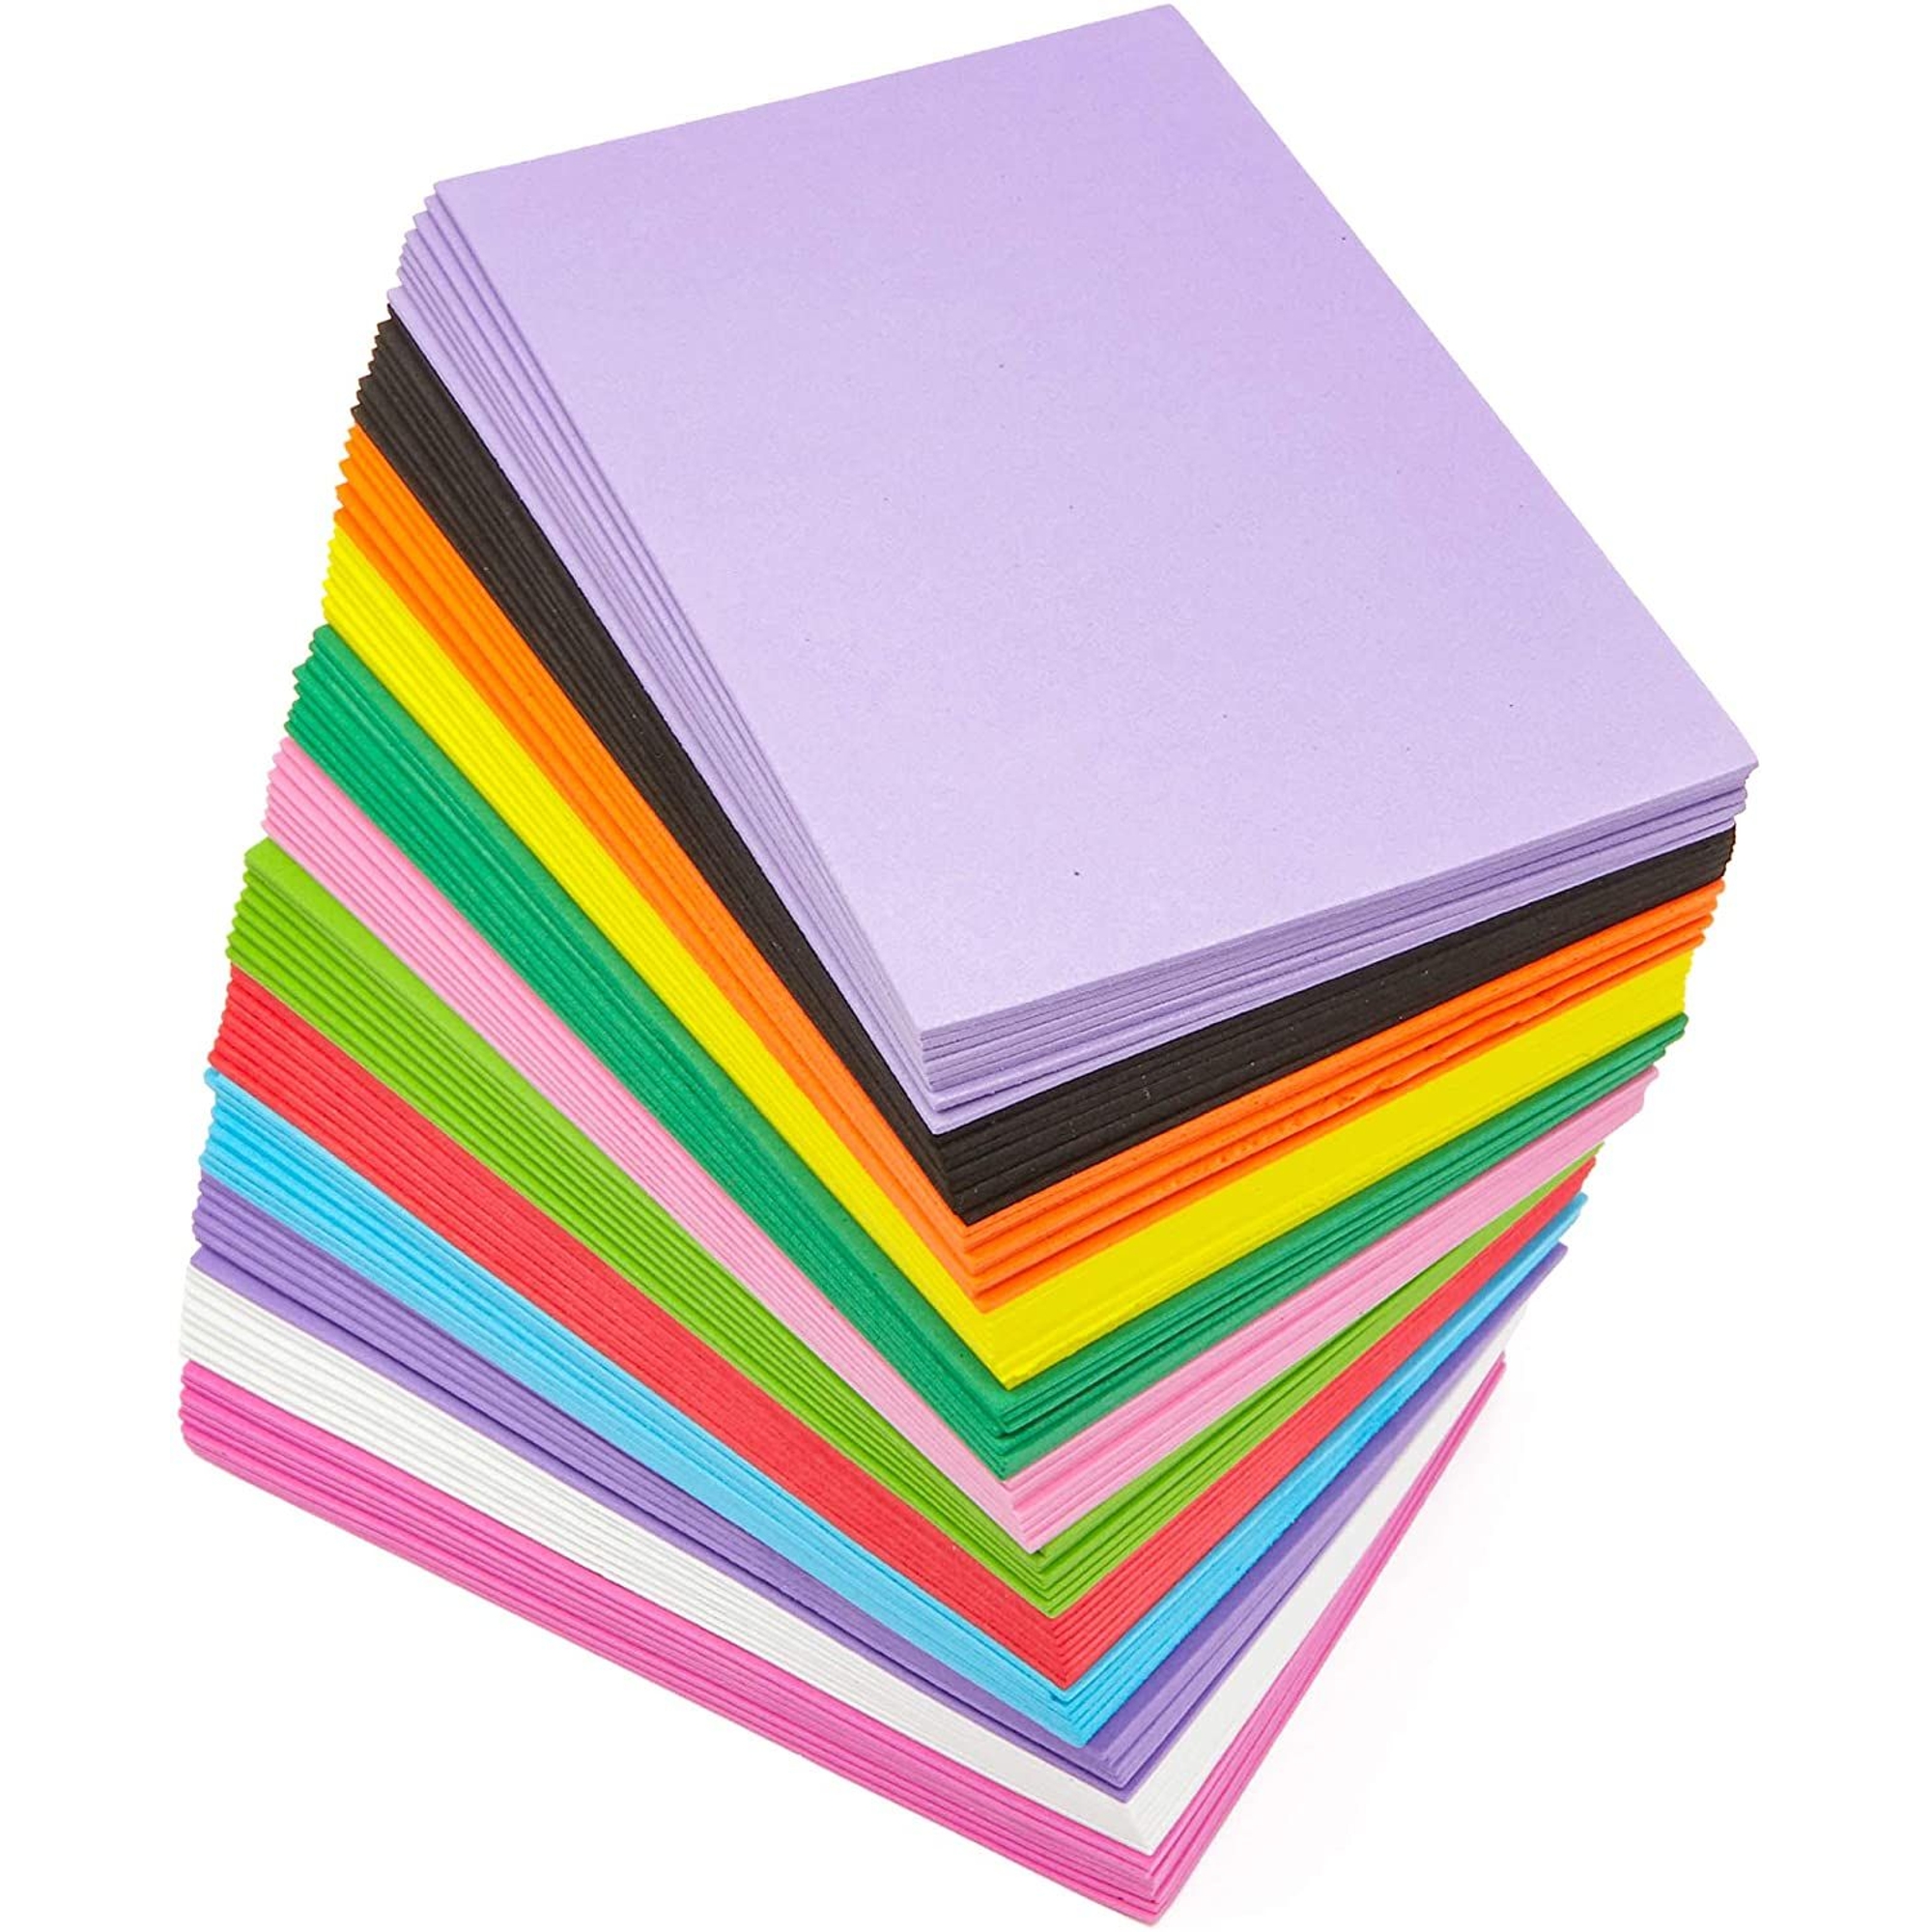 96 Pack Multicolored 2mm EVA Foam Sheets for Cosplay, Costumes, Arts and  Crafts Projects (4 x 6 In)